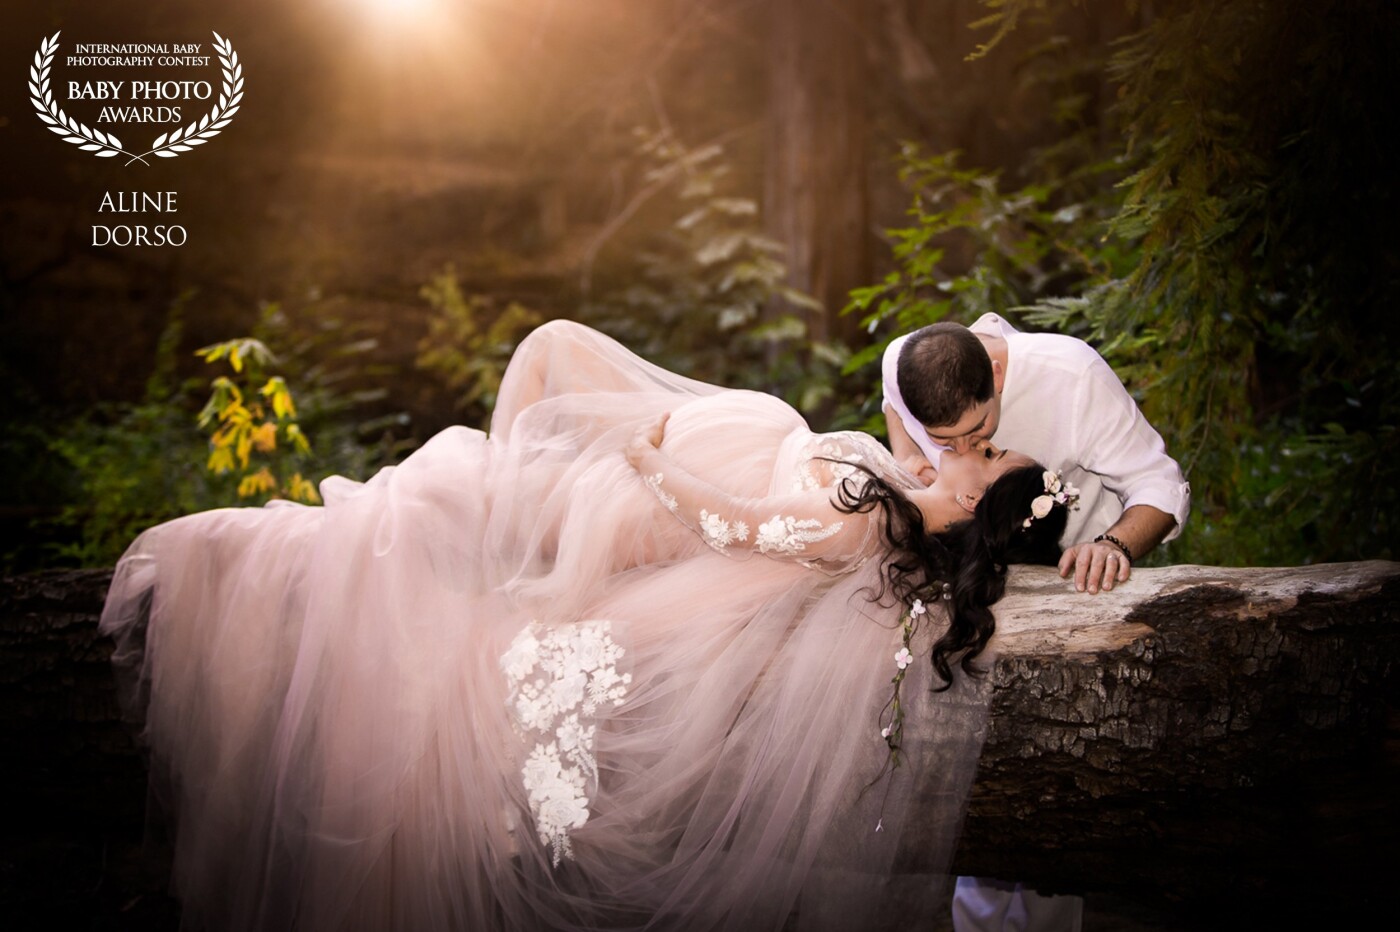 The perfect magic moment. Mom wanted an enchanted dreamy maternity session and the results show that dreams do come true. A true princess and her prince charming anxiously waiting to hold their precious gift. 